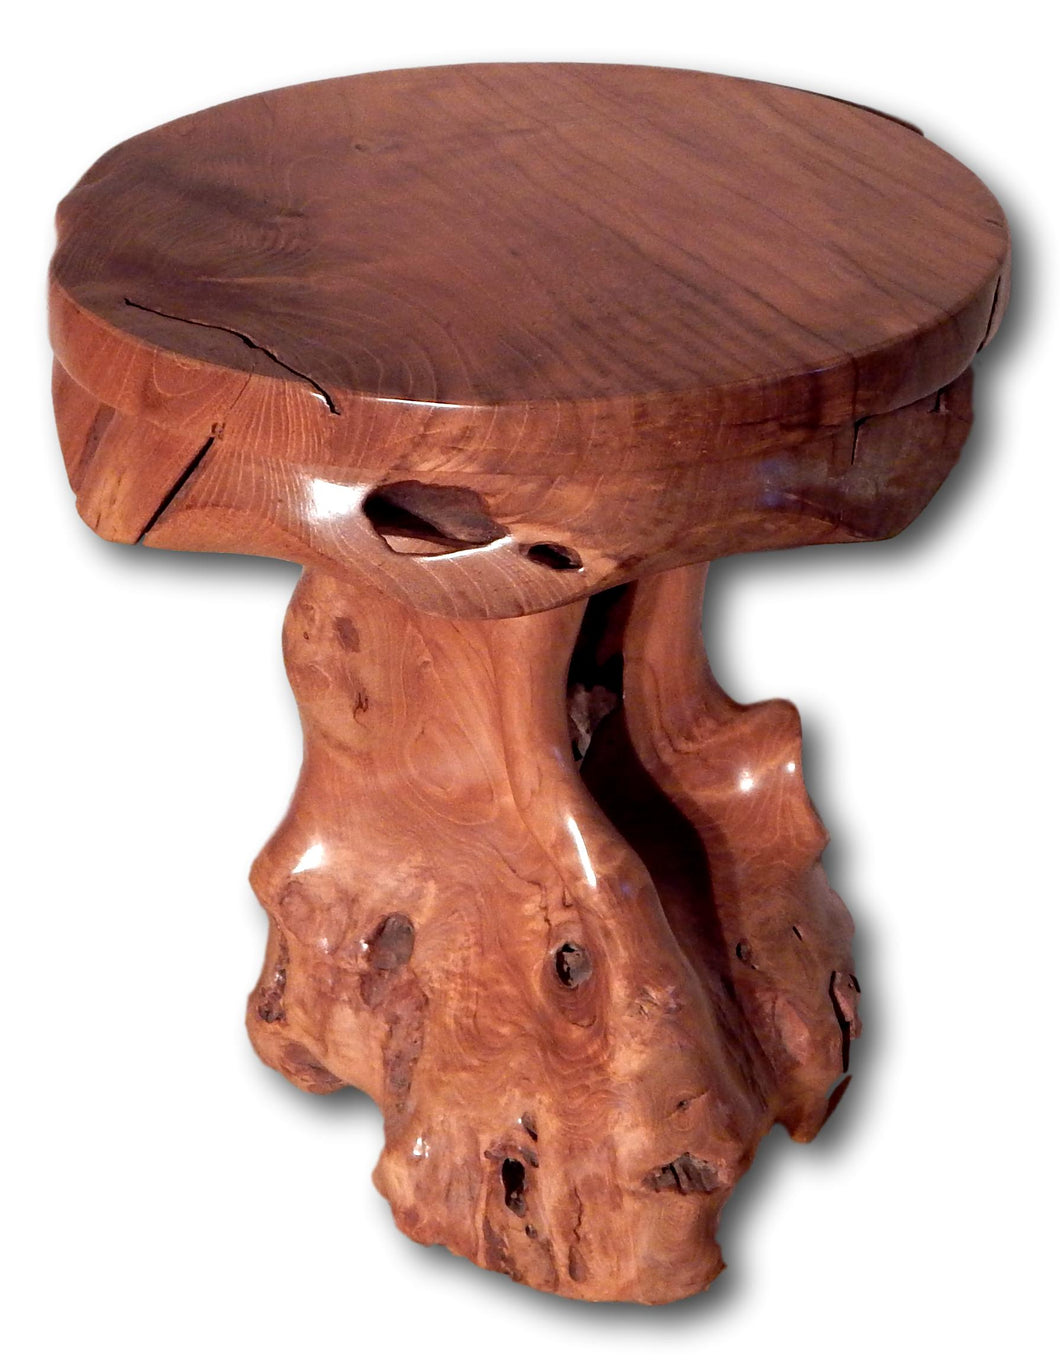 teak root end table: Roots Cabinets & Tiles: solid teak end tables, salvaged teak side table, teak coffee tables, teak root wood end tables, reclaimed teak end table, root end table, tree root end tables